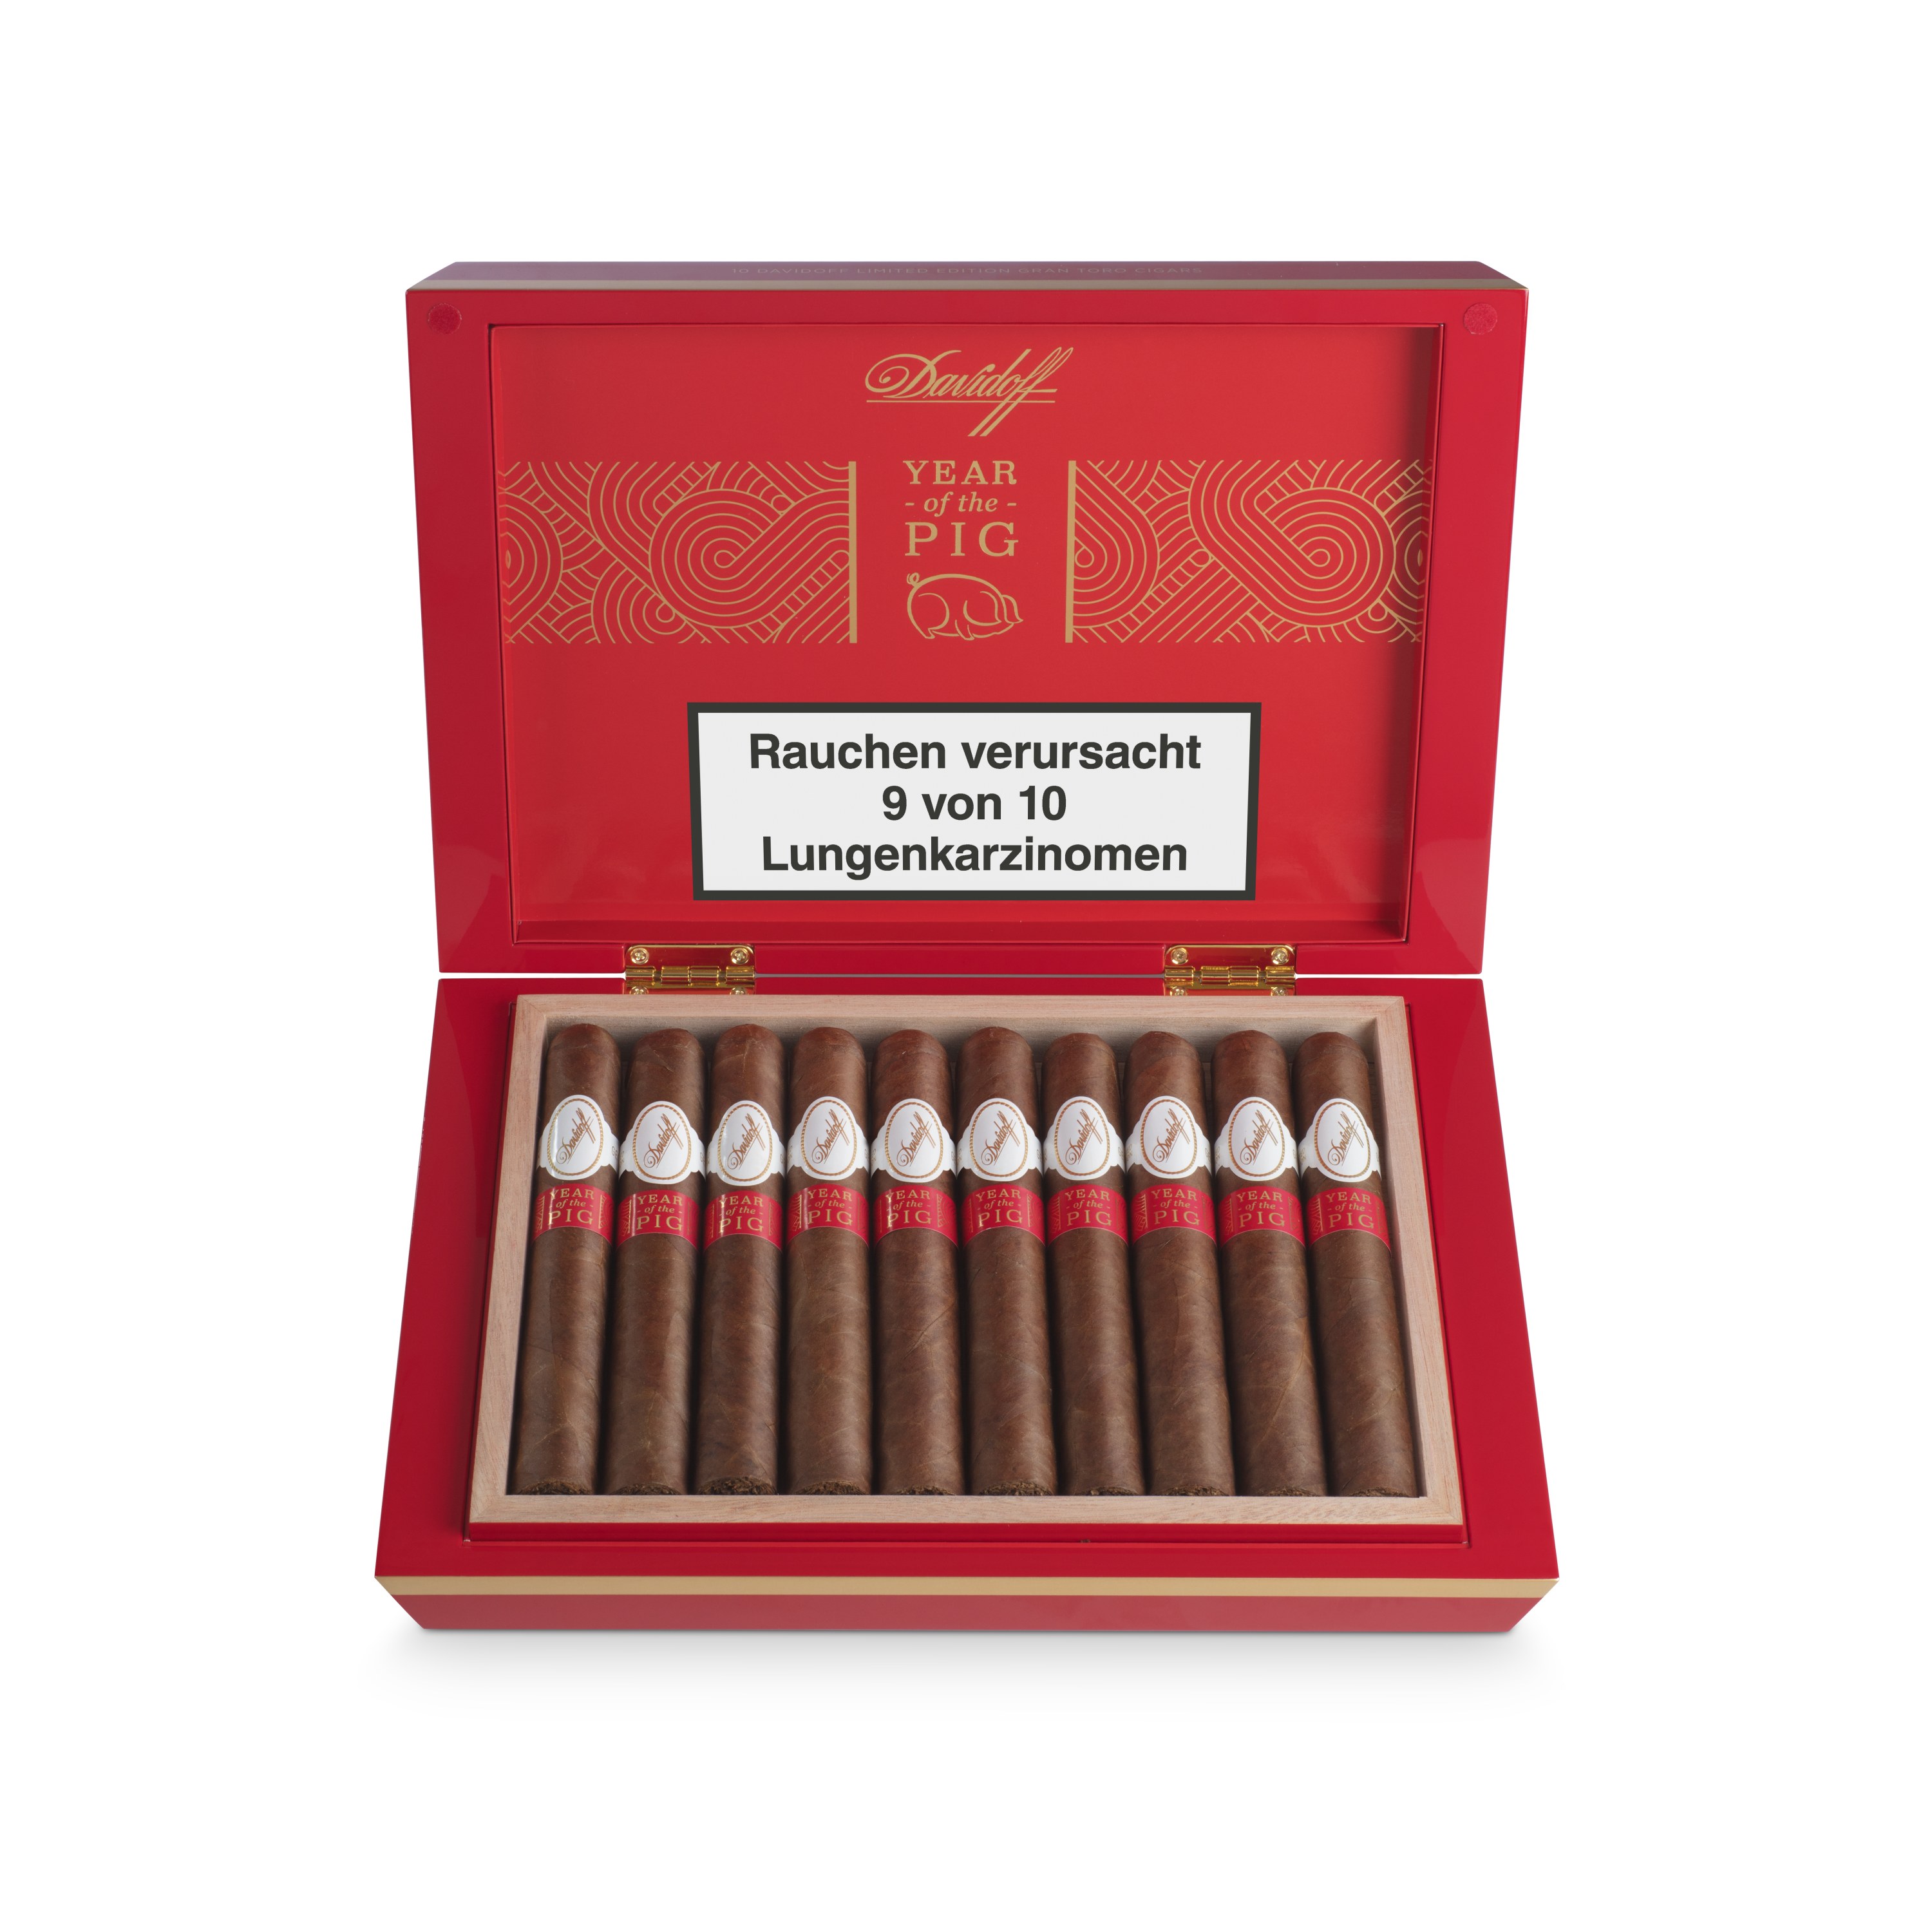 Davidoff Year of the Pig 2019 Limited Edition